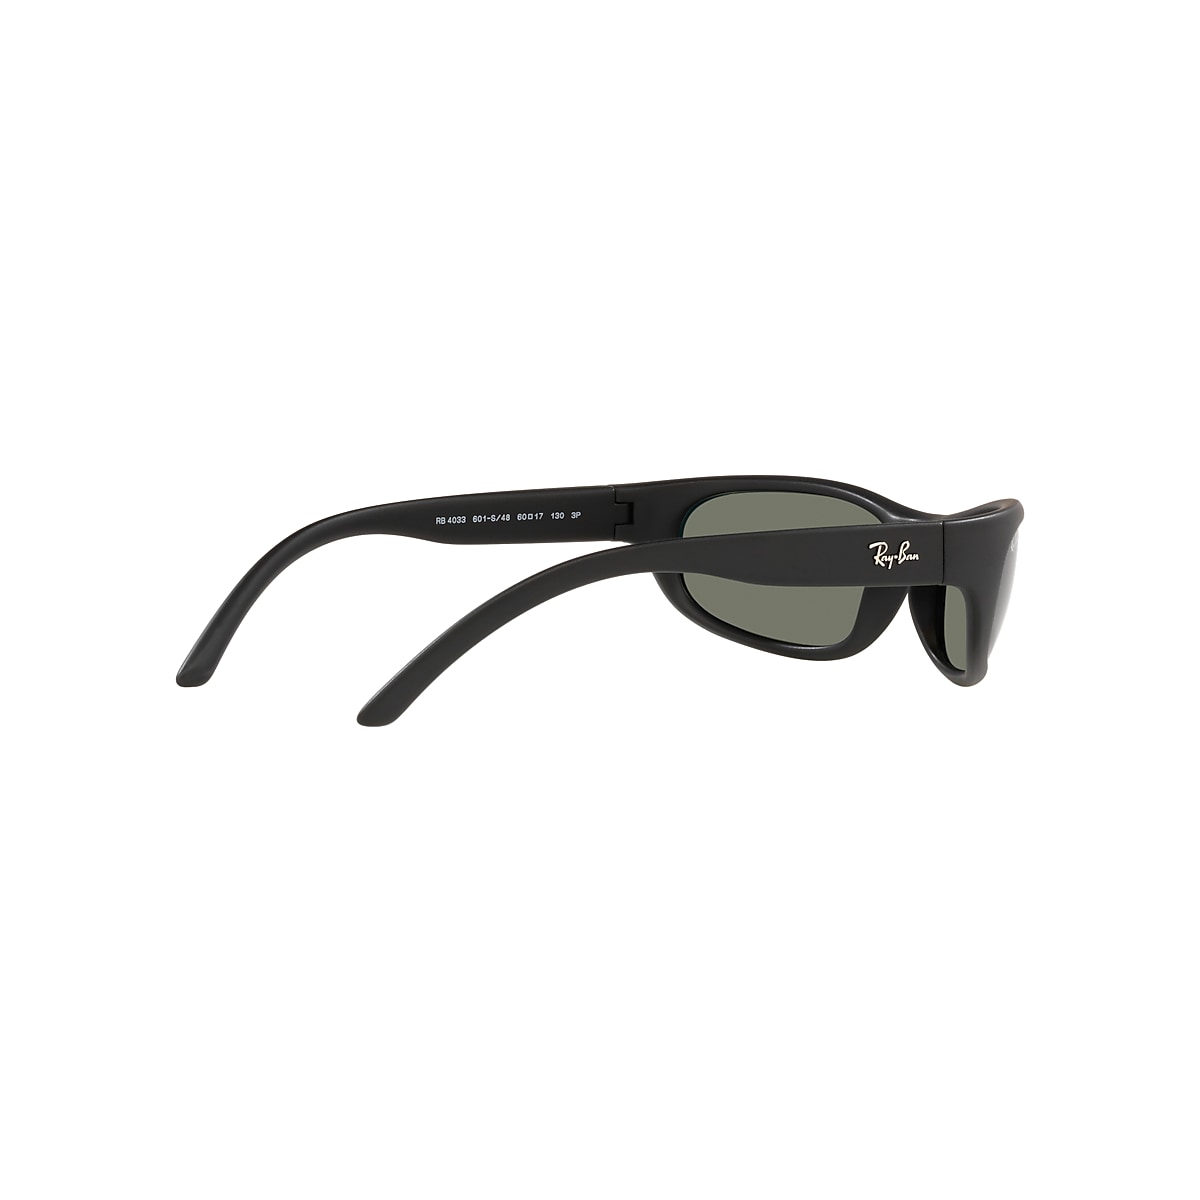 Rb4033 Sunglasses in Black and Green | Ray-Ban®